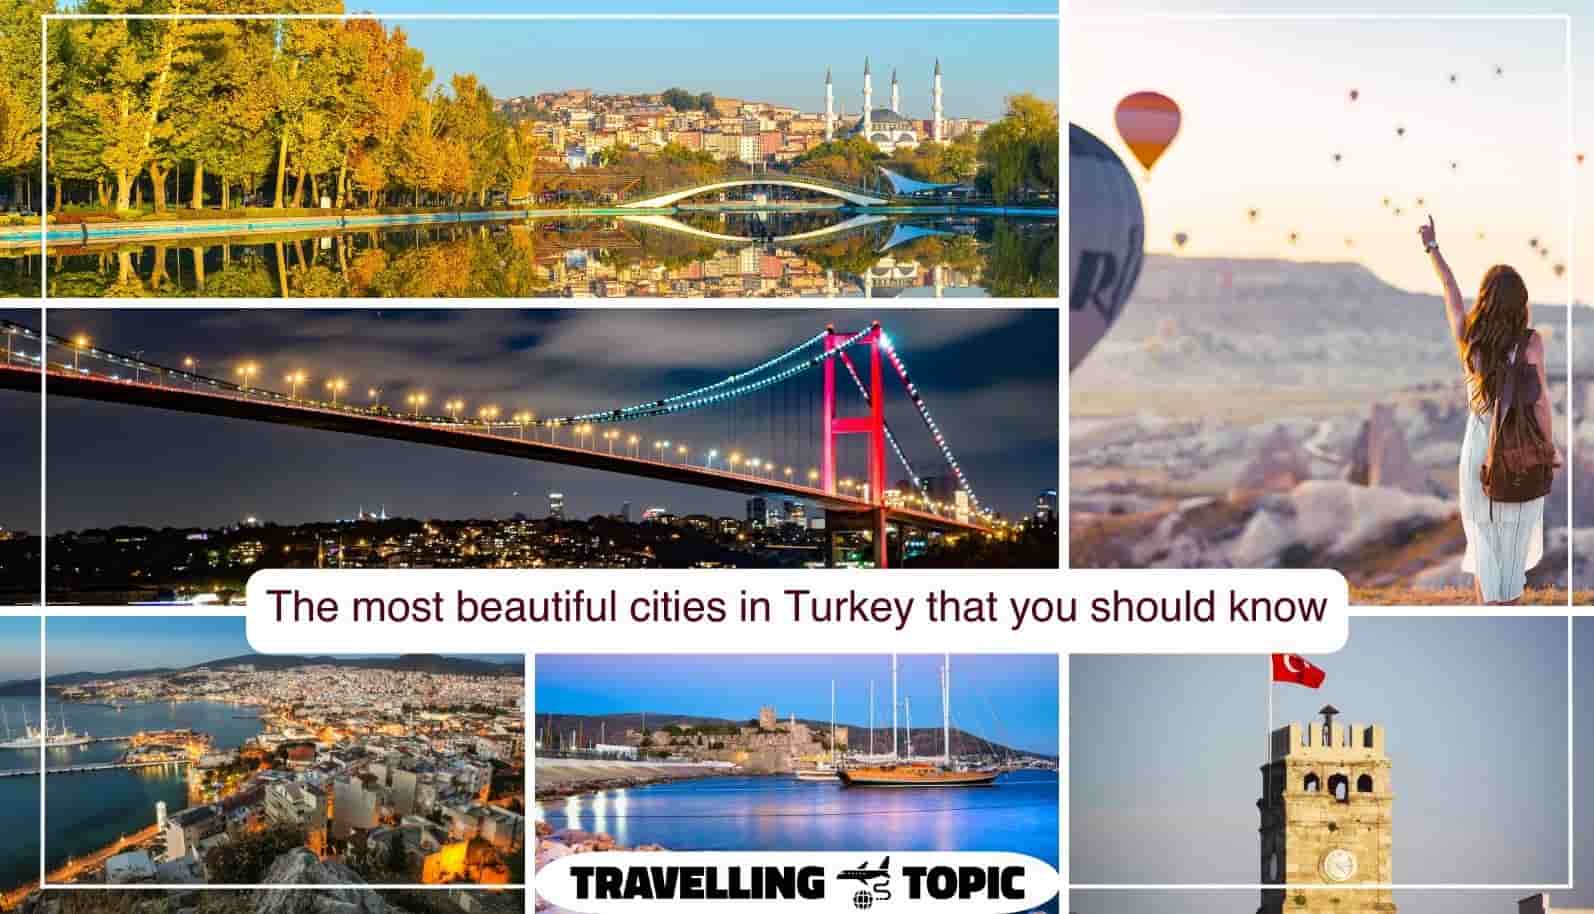 The most beautiful cities in Turkey that you should know